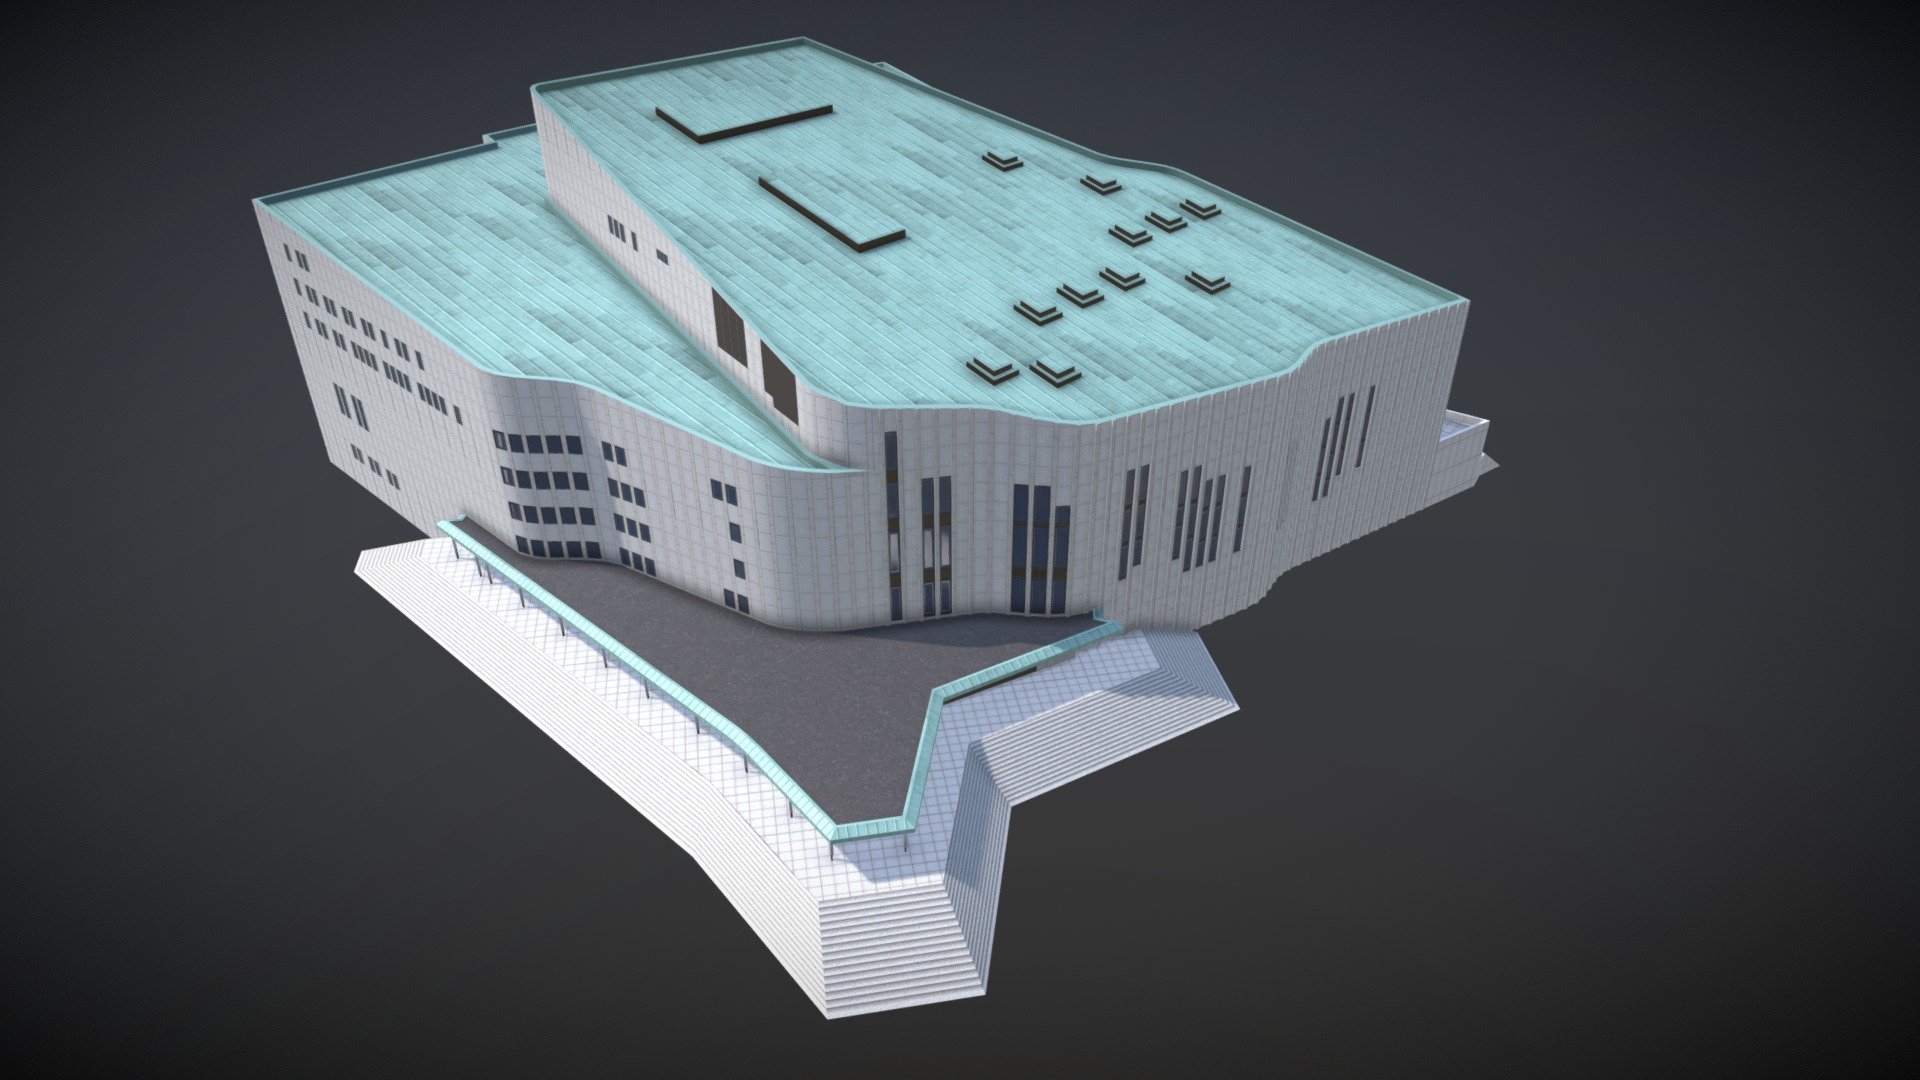 Modelled after the Aalto Theatre in Essen, Germany. Asset for Cities: Skylines.

The large staircases are not part of the original architecture; the asset is meant to be partly sunken into slightly sloped terrain that leads from street level up to just below the tiled floors, hiding the stairs entirely 3d model